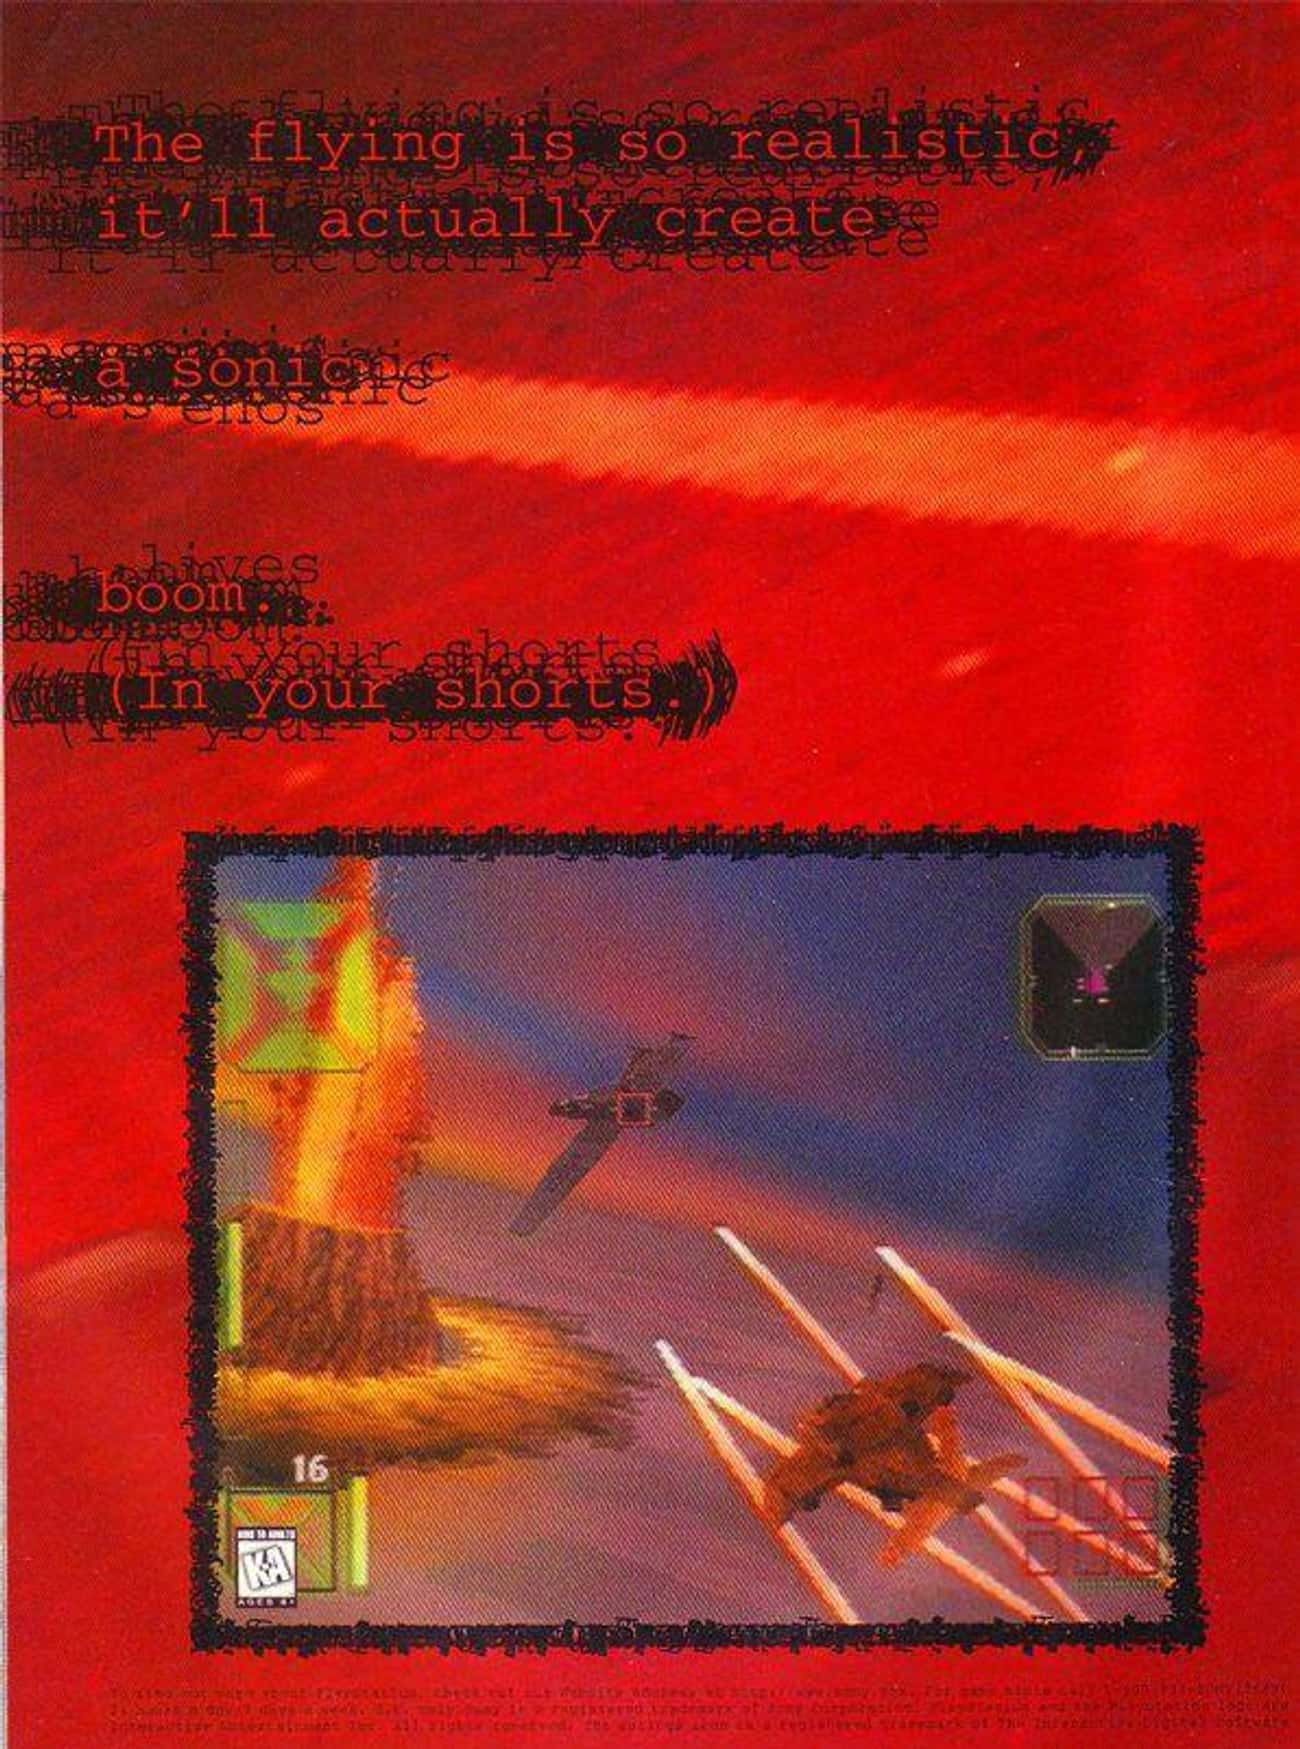 Vintage Gaming Ads - poster - The flying is so realistic it'll actually create acCuaTT Create a sonigre Senos shinves boom. your shorts In your shorts Use Sprox 16 50 A70 Salon Gy BHsup Wetter Latest Ter. all rigu mestadio 30 Fame Rameno Scerts Prosemary 